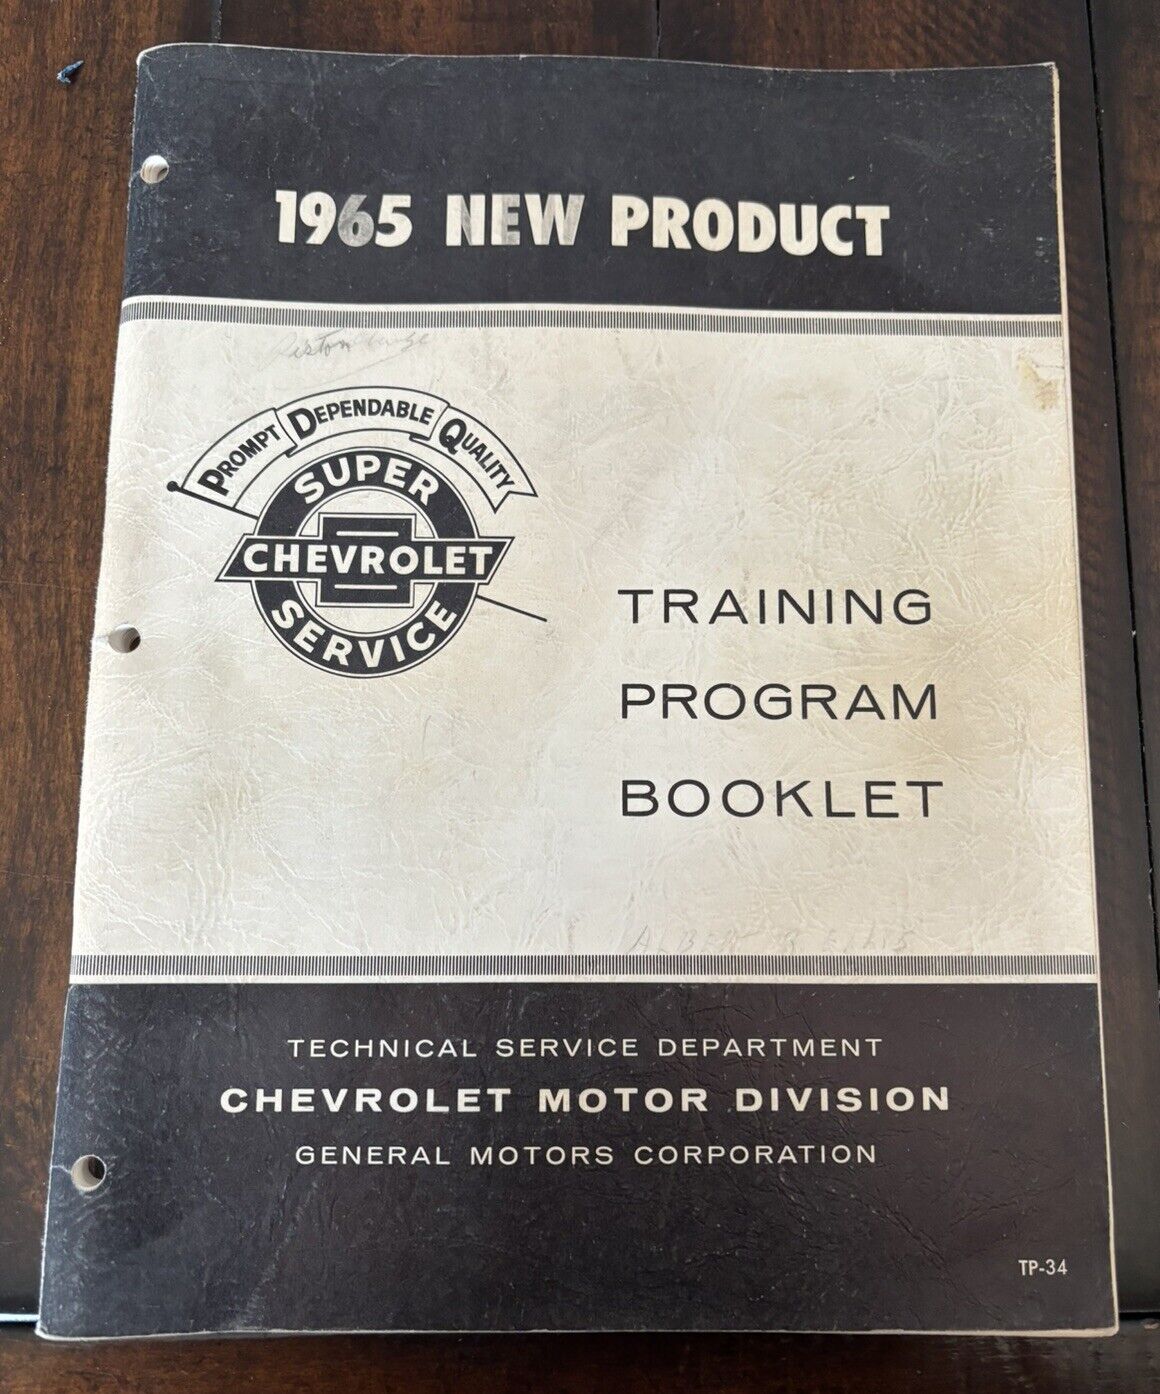 1965 Chevrolet Dealership New Product Training Program Booklet 104 PAGES TP-34